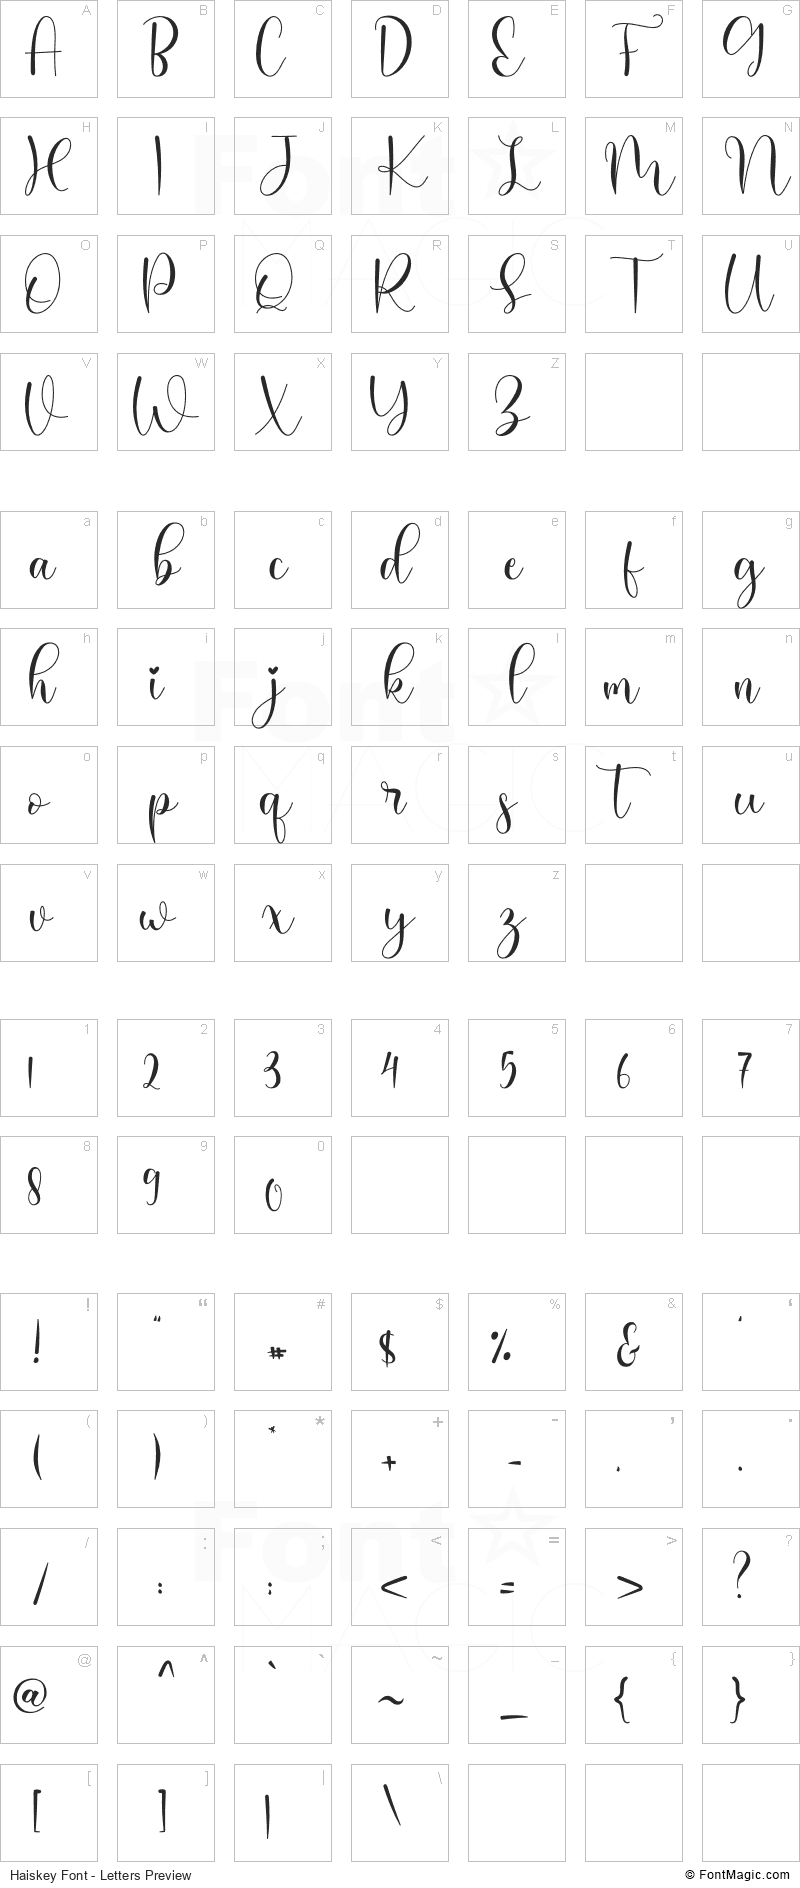 Haiskey Font - All Latters Preview Chart